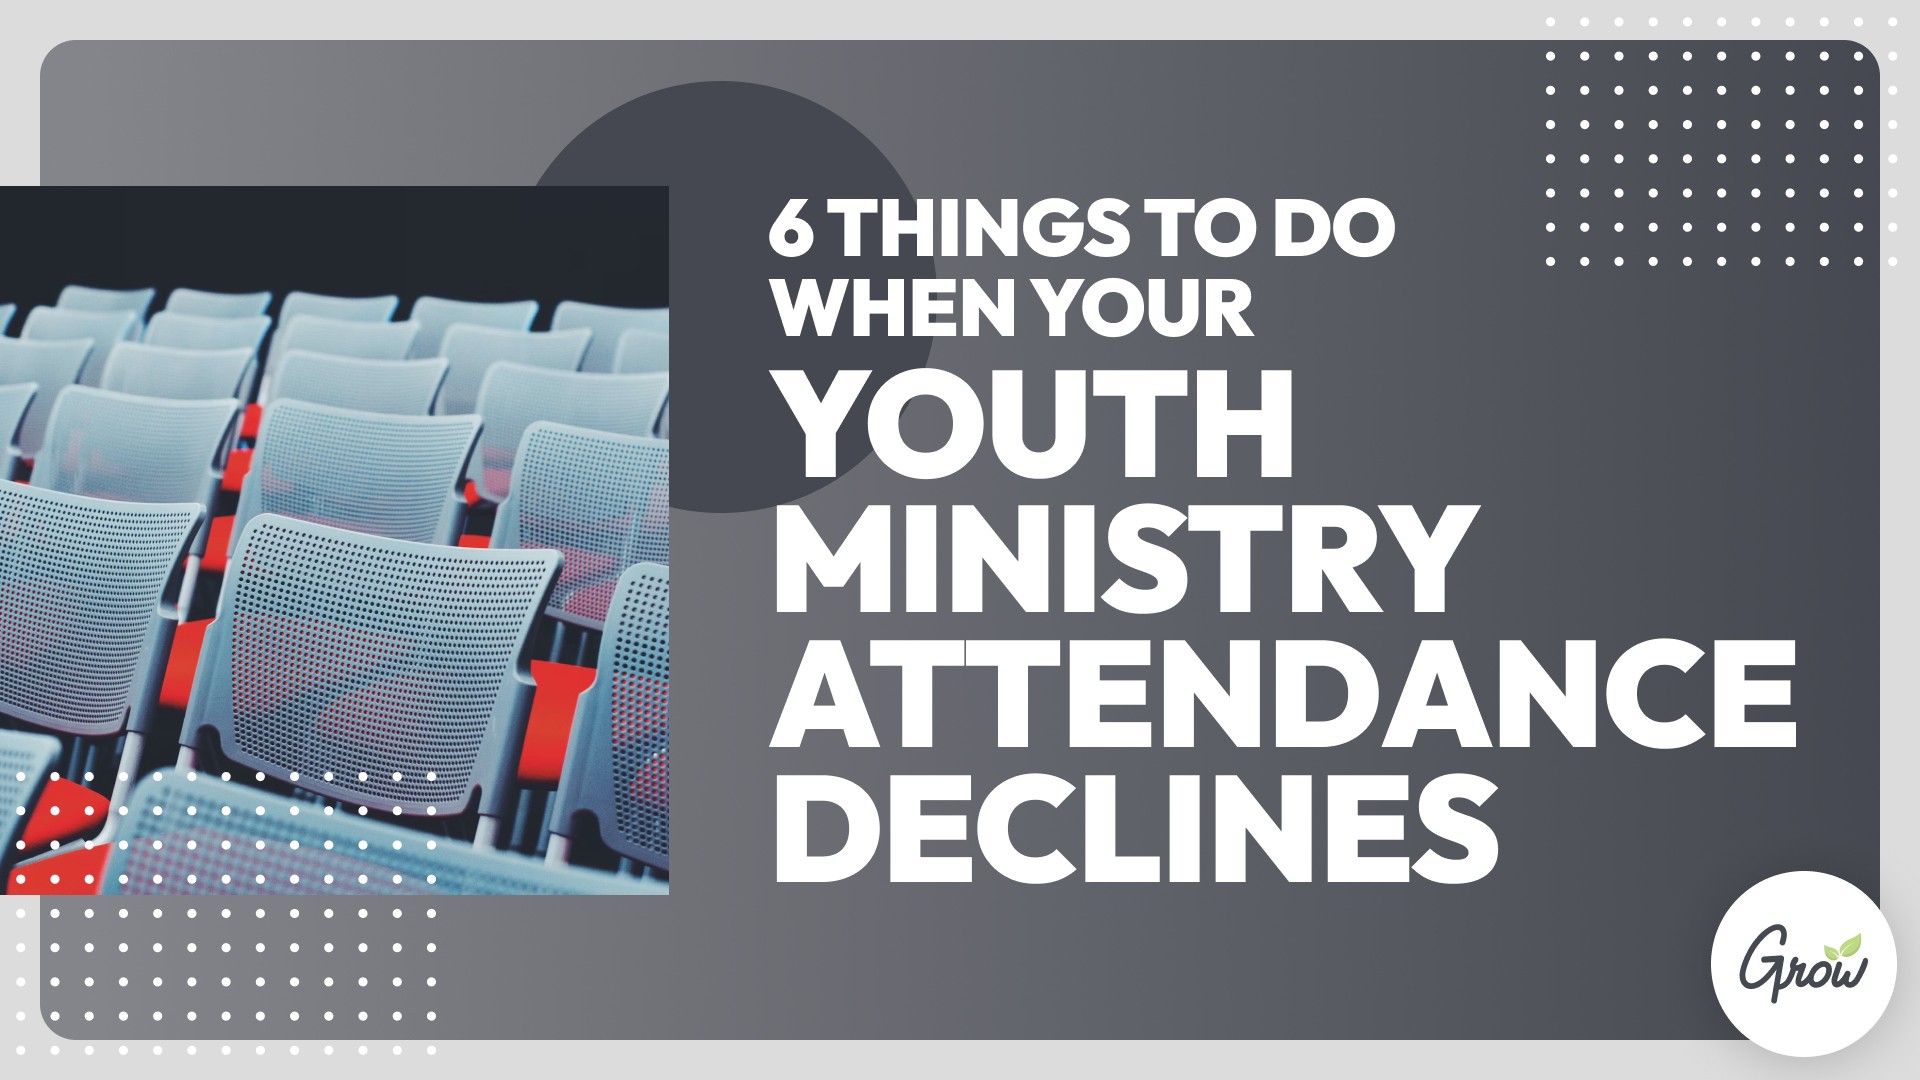 6 Things To Do When Your Youth Ministry Attendance Declines